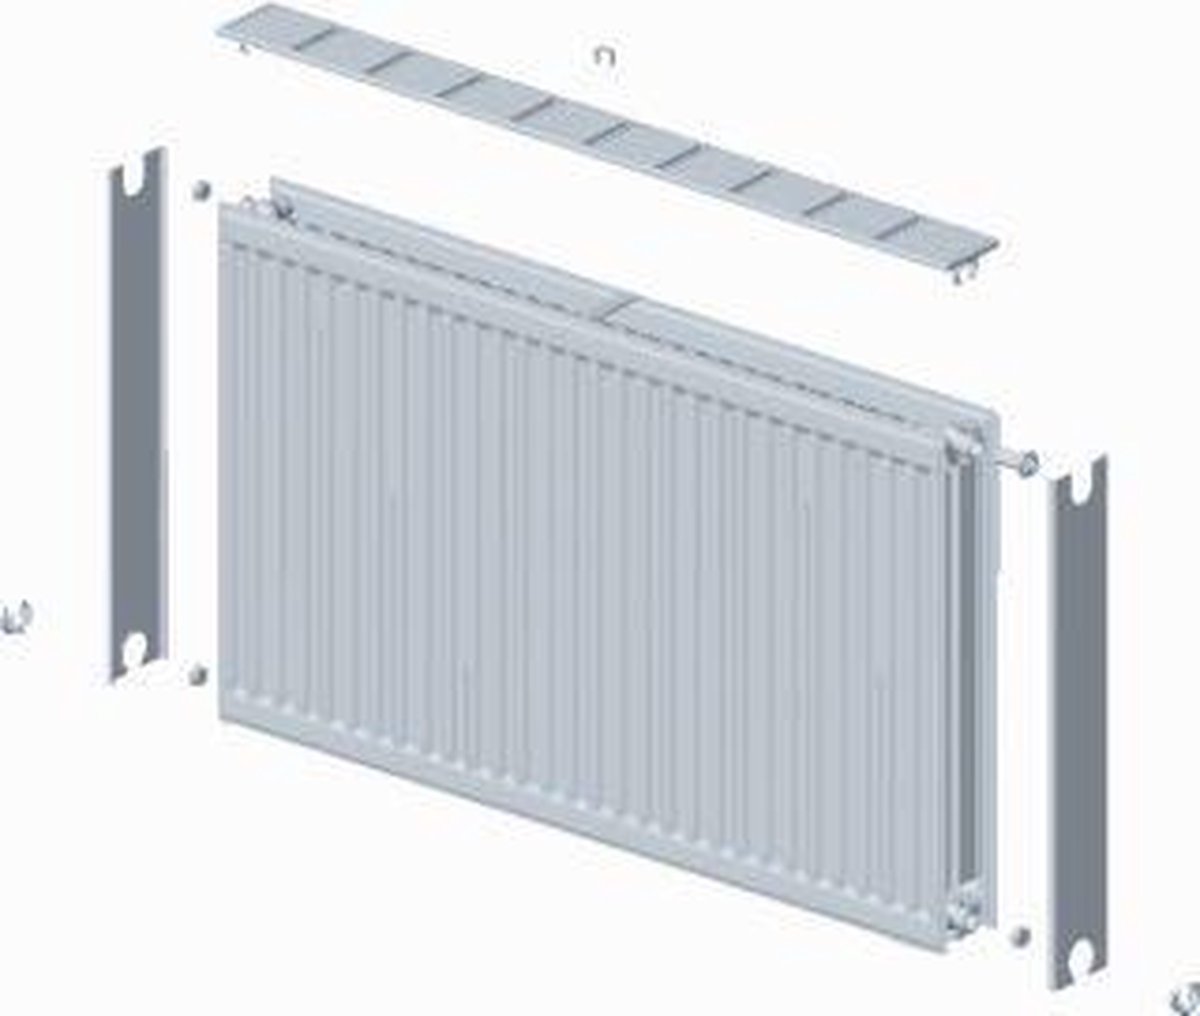 Stelrad paneelradiator Novello, staal, wit, (hxlxd) 500x2800x100mm, 22